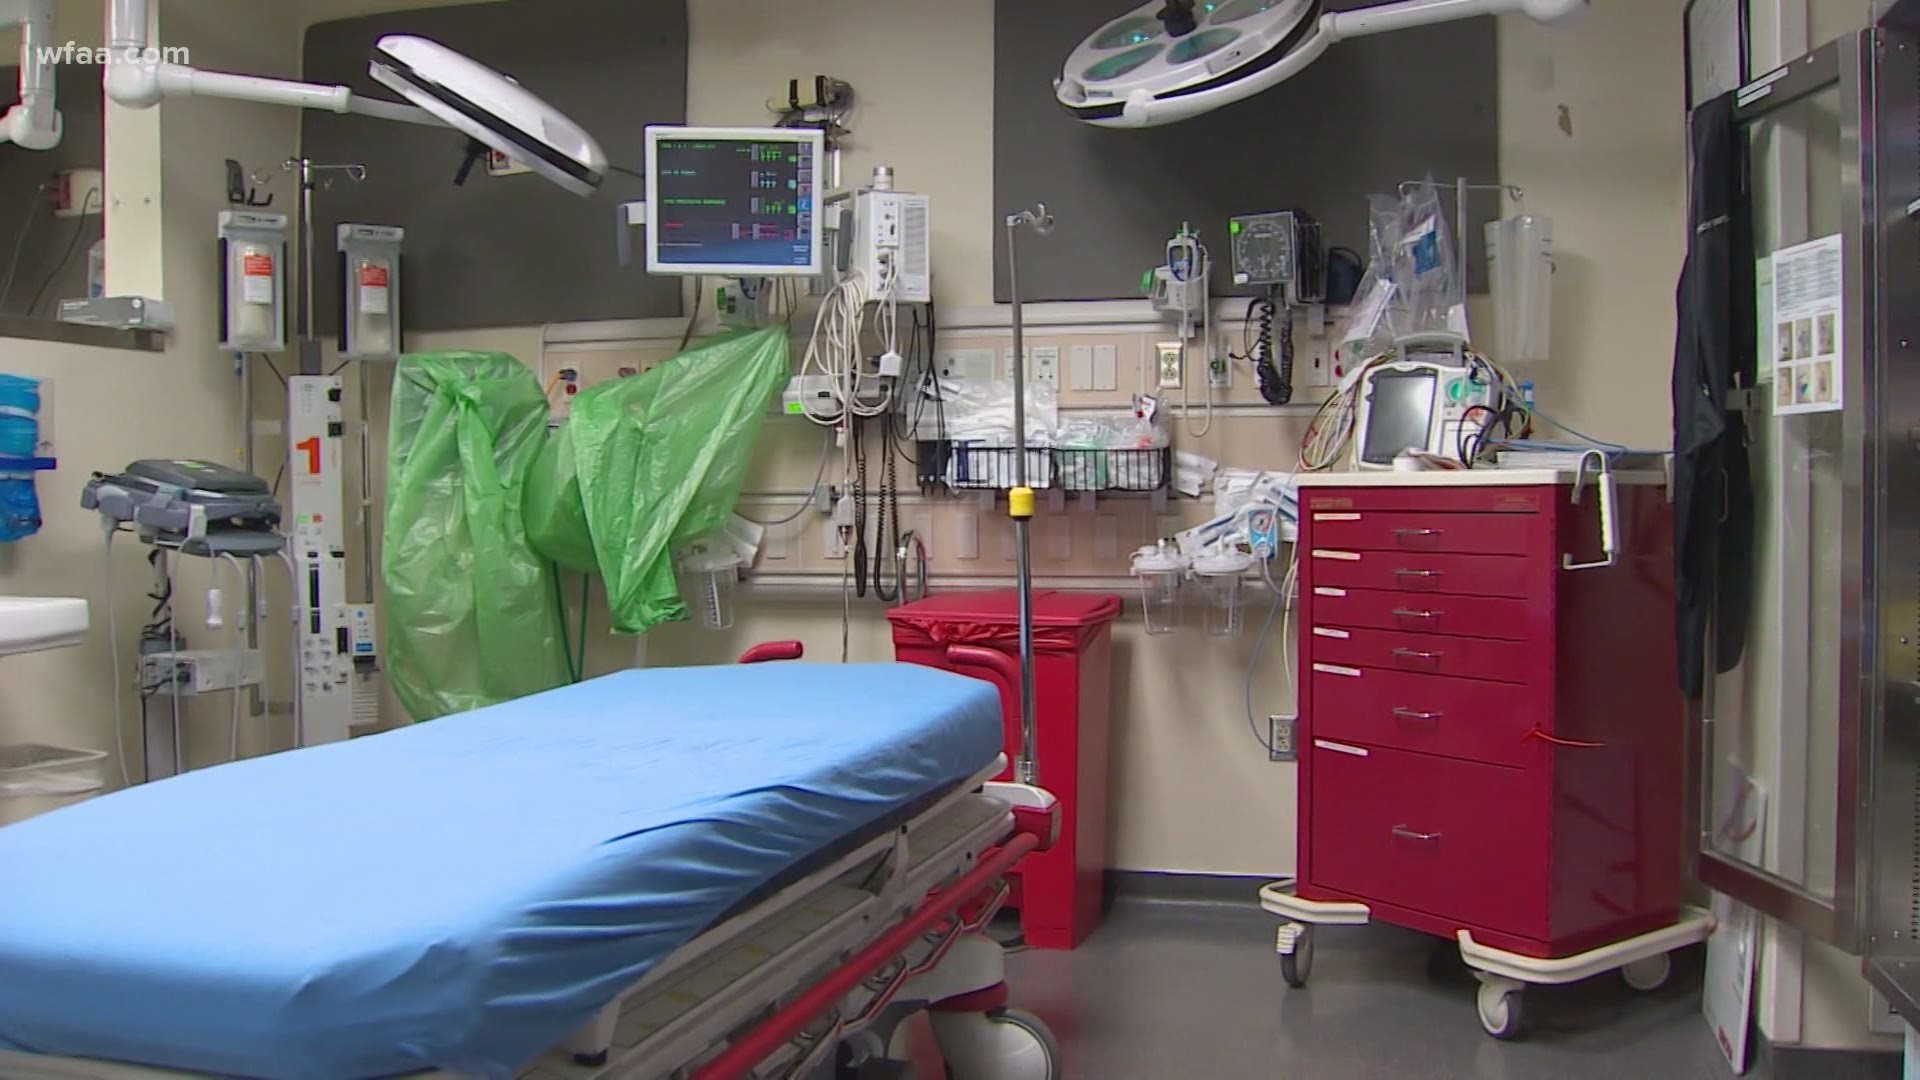 "ICU capacity, we're at 92% occupied. Only 36 ICU beds remaining in Tarrant County. For a county of two million people, that's very few beds remaining," said Taneja.